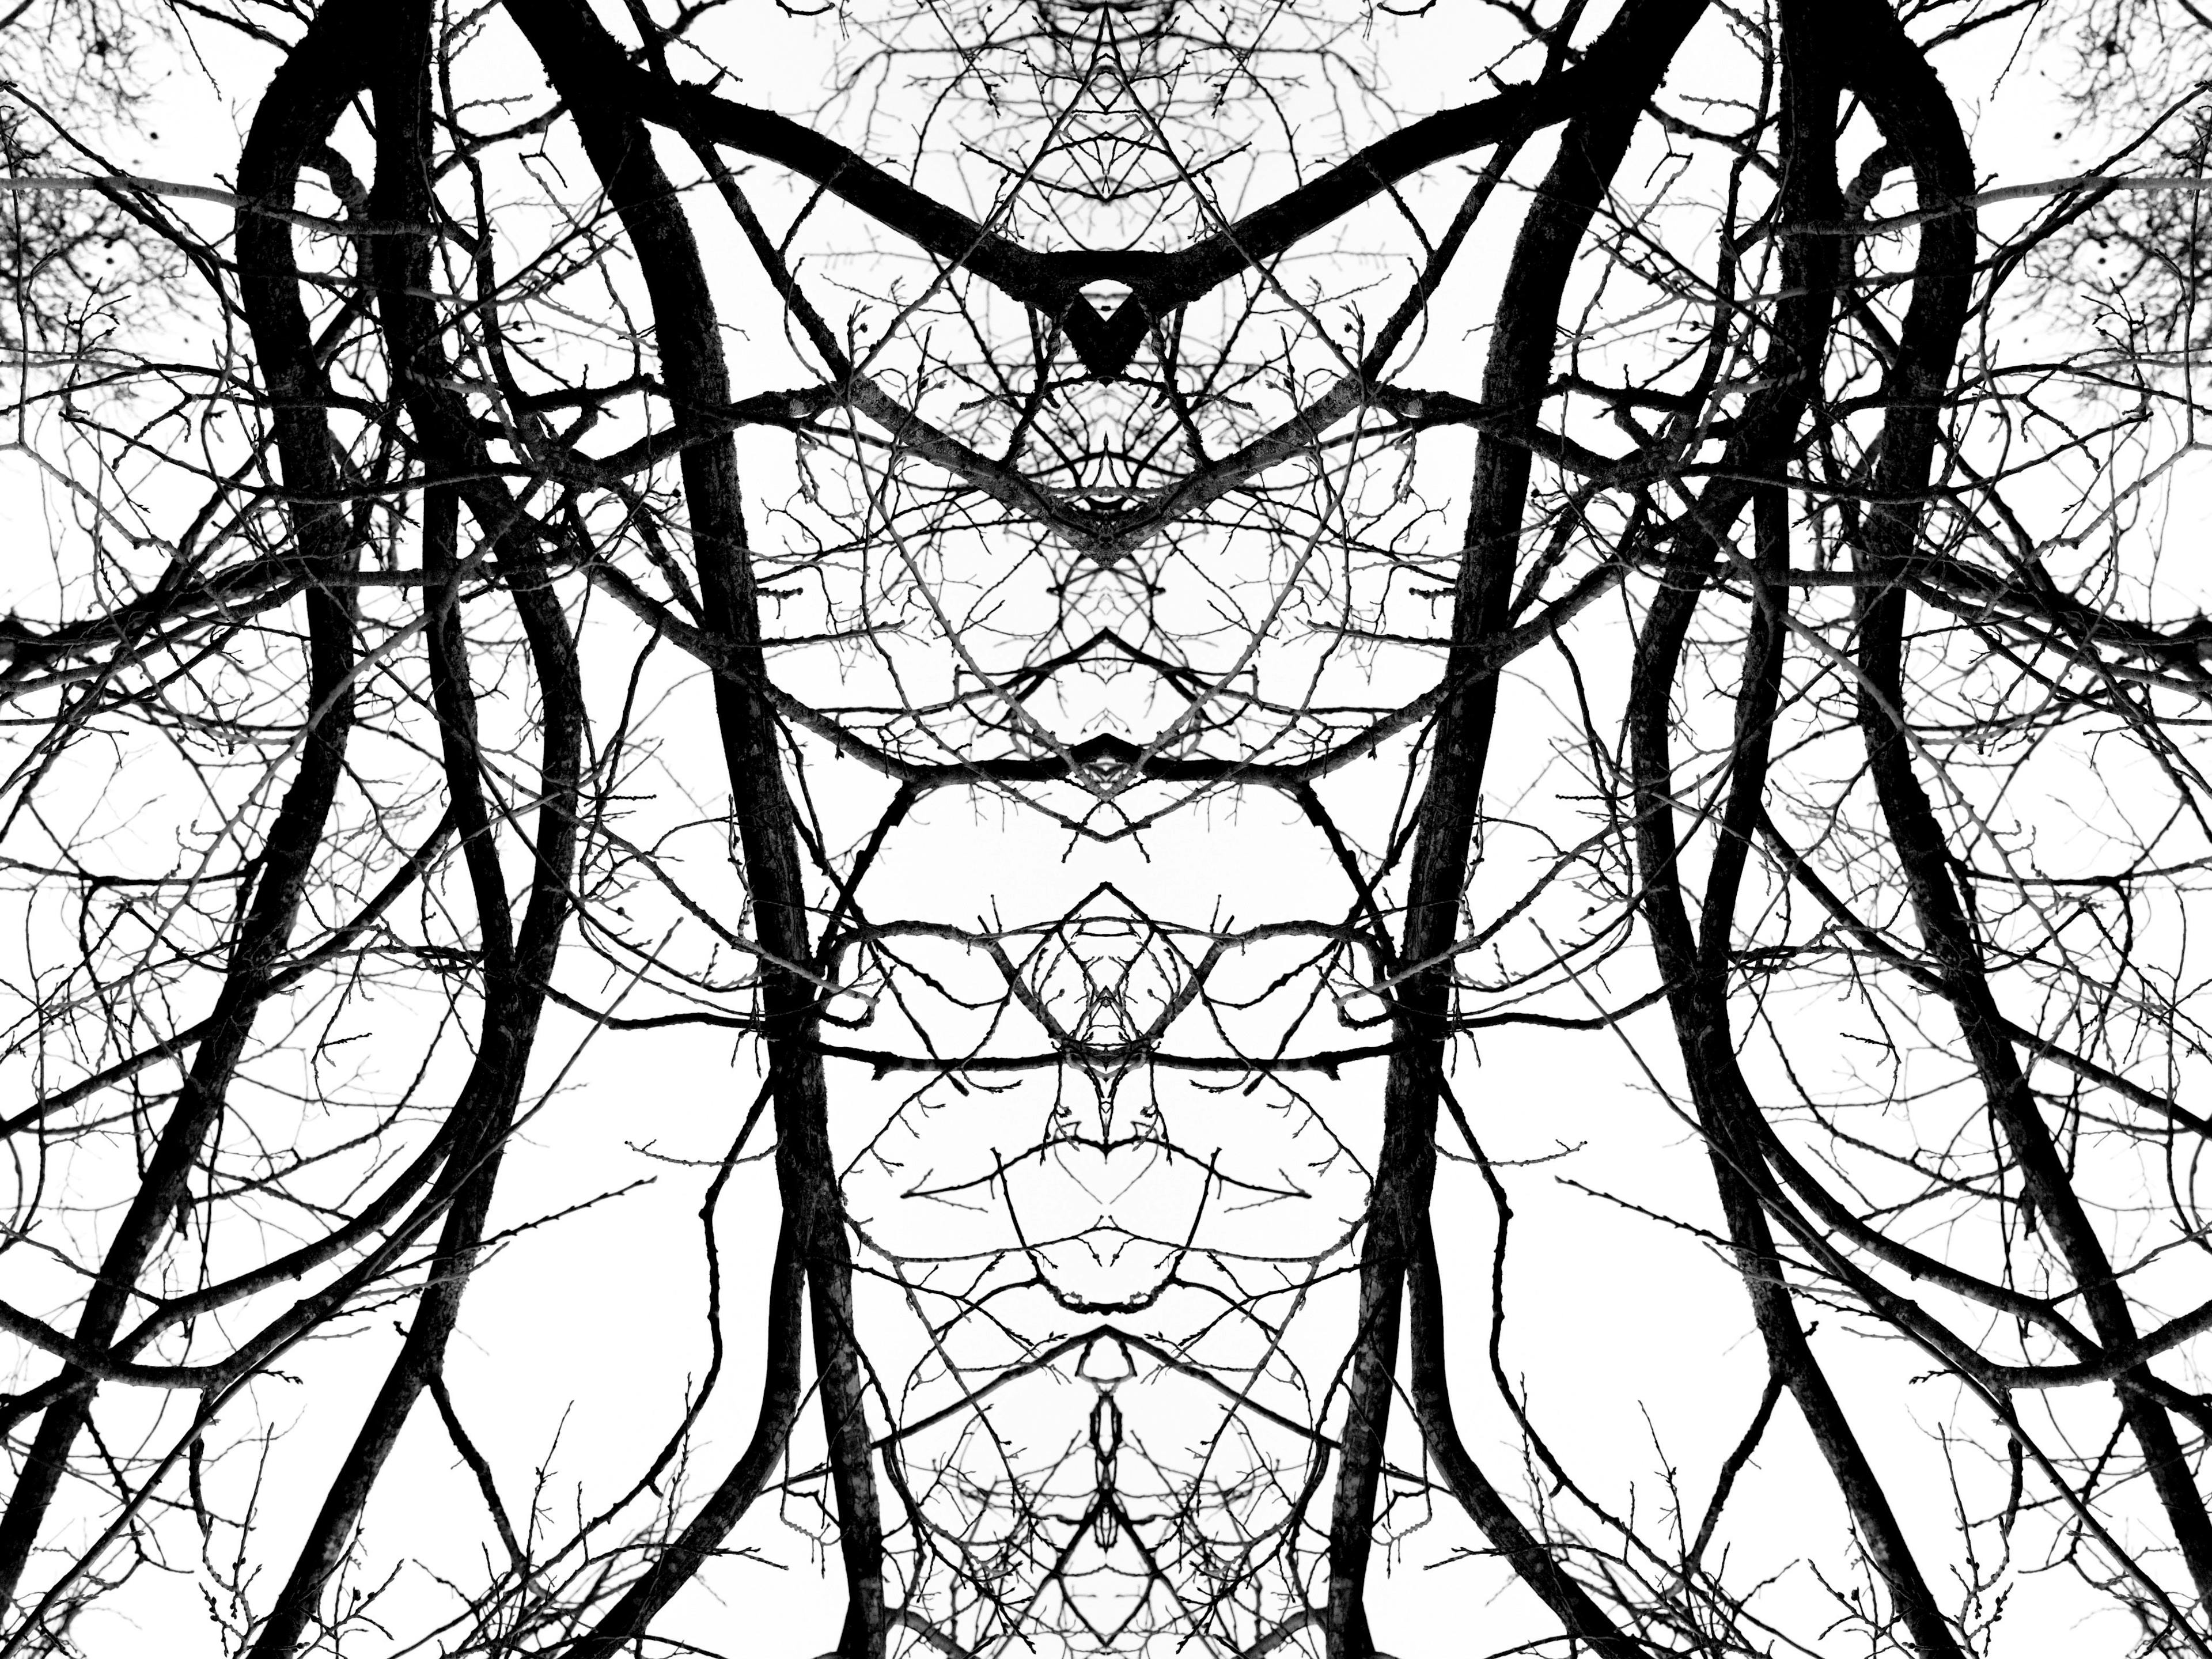 A mirrored black and white image of leafless entangled tree branches. 